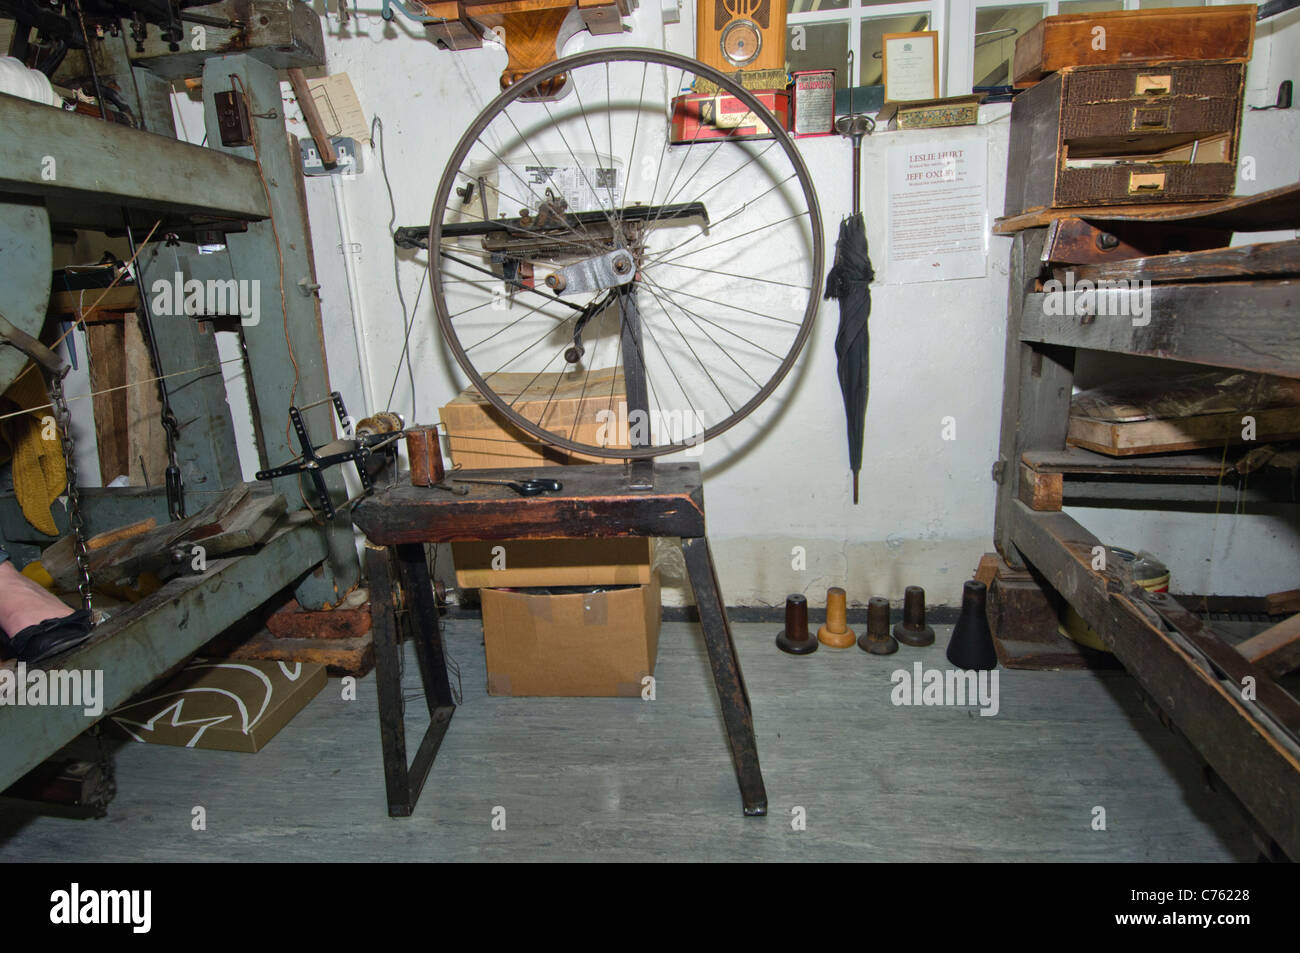 A vintage wool winder fashioned from a bicycle wheel and wooden saw-type bench. Stock Photo